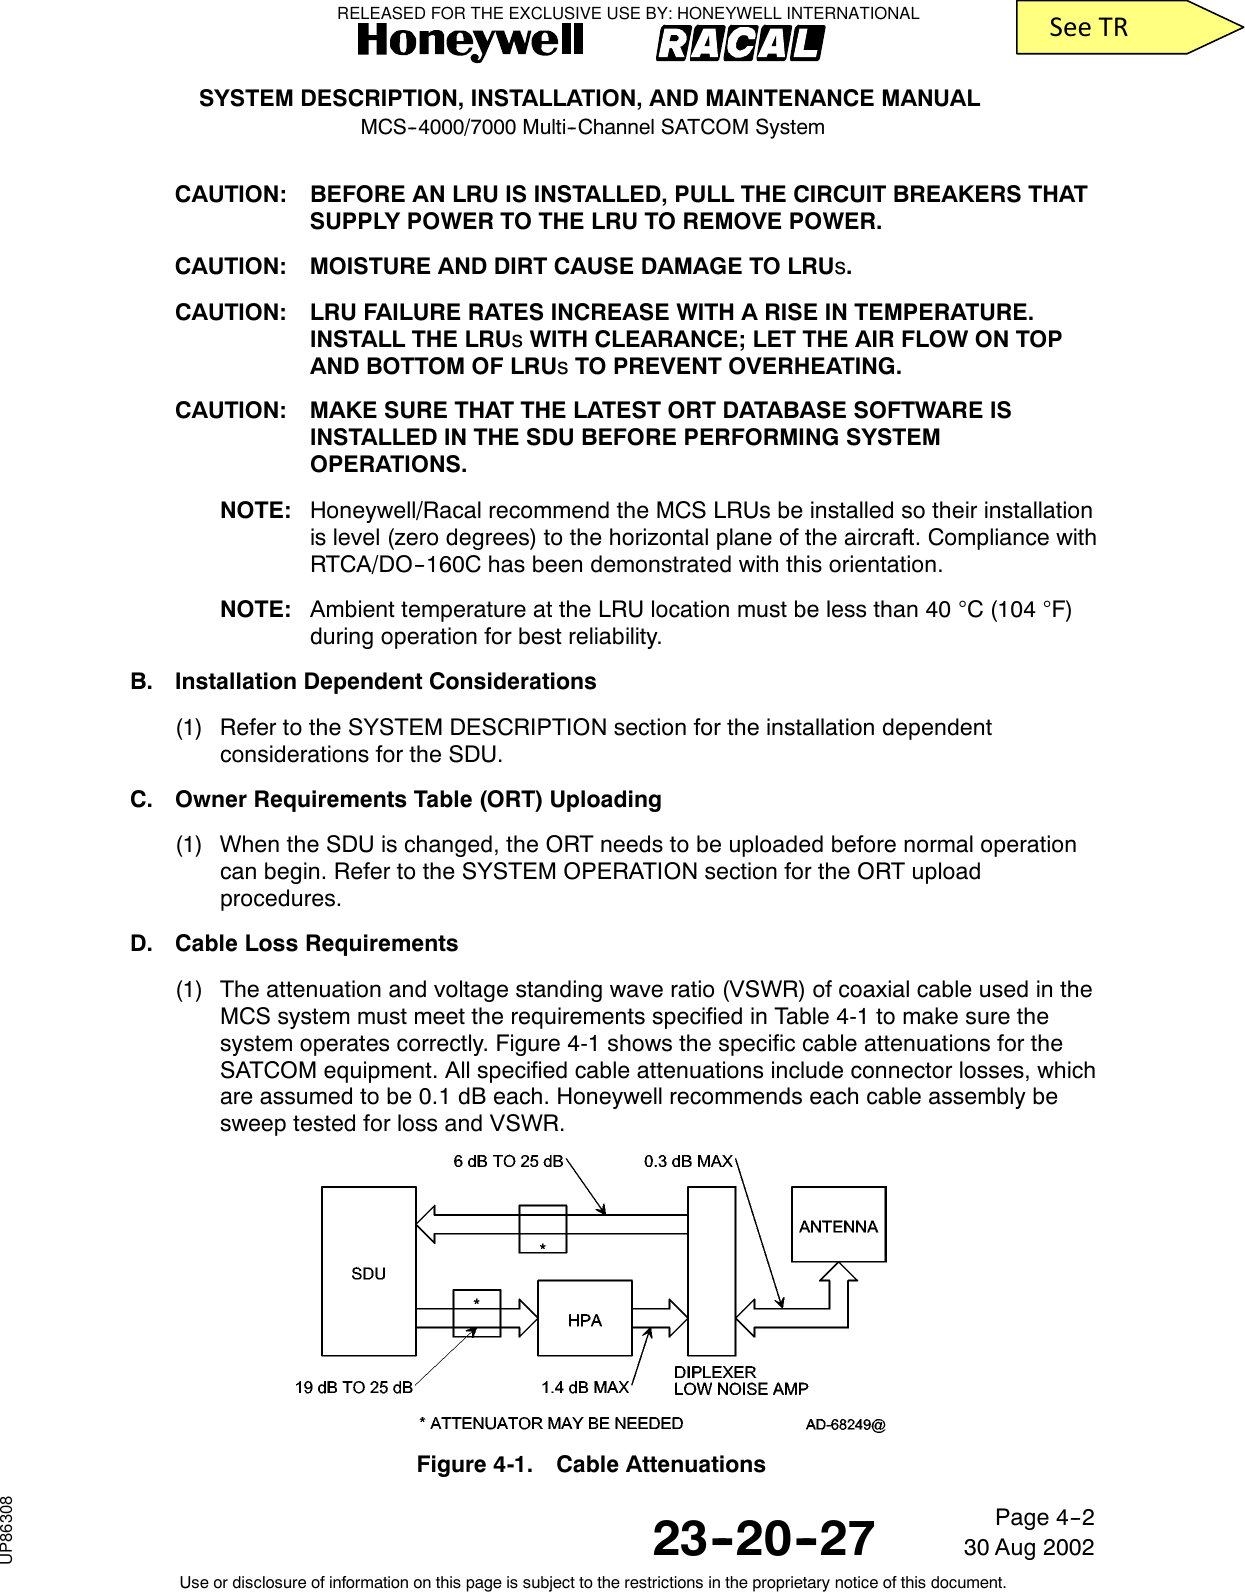 SYSTEM DESCRIPTION, INSTALLATION, AND MAINTENANCE MANUALMCS--4000/7000 Multi--Channel SATCOM System23--20--2730 Aug 2002Use or disclosure of information on this page is subject to the restrictions in the proprietary notice of this document.Page 4--2CAUTION: BEFORE AN LRU IS INSTALLED, PULL THE CIRCUIT BREAKERS THATSUPPLY POWER TO THE LRU TO REMOVE POWER.CAUTION: MOISTURE AND DIRT CAUSE DAMAGE TO LRUs.CAUTION: LRU FAILURE RATES INCREASE WITH A RISE IN TEMPERATURE.INSTALL THE LRUsWITH CLEARANCE; LET THE AIR FLOW ON TOPAND BOTTOM OF LRUsTO PREVENT OVERHEATING.CAUTION: MAKE SURE THAT THE LATEST ORT DATABASE SOFTWARE ISINSTALLED IN THE SDU BEFORE PERFORMING SYSTEMOPERATIONS.NOTE: Honeywell/Racal recommend the MCS LRUs be installed so their installationis level (zero degrees) to the horizontal plane of the aircraft. Compliance withRTCA/DO--160C has been demonstrated with this orientation.NOTE: Ambient temperature at the LRU location must be less than 40 °C (104 °F)during operation for best reliability.B. Installation Dependent Considerations(1) Refer to the SYSTEM DESCRIPTION section for the installation dependentconsiderations for the SDU.C. Owner Requirements Table (ORT) Uploading(1) When the SDU is changed, the ORT needs to be uploaded before normal operationcan begin. Refer to the SYSTEM OPERATION section for the ORT uploadprocedures.D. Cable Loss Requirements(1) The attenuation and voltage standing wave ratio (VSWR) of coaxial cable used in theMCS system must meet the requirements specified in Table 4-1 to make sure thesystem operates correctly. Figure 4-1 shows the specific cable attenuations for theSATCOM equipment. All specified cable attenuations include connector losses, whichare assumed to be 0.1 dB each. Honeywell recommends each cable assembly besweep tested for loss and VSWR.Figure 4-1. Cable AttenuationsRELEASED FOR THE EXCLUSIVE USE BY: HONEYWELL INTERNATIONALUP86308SeeTR